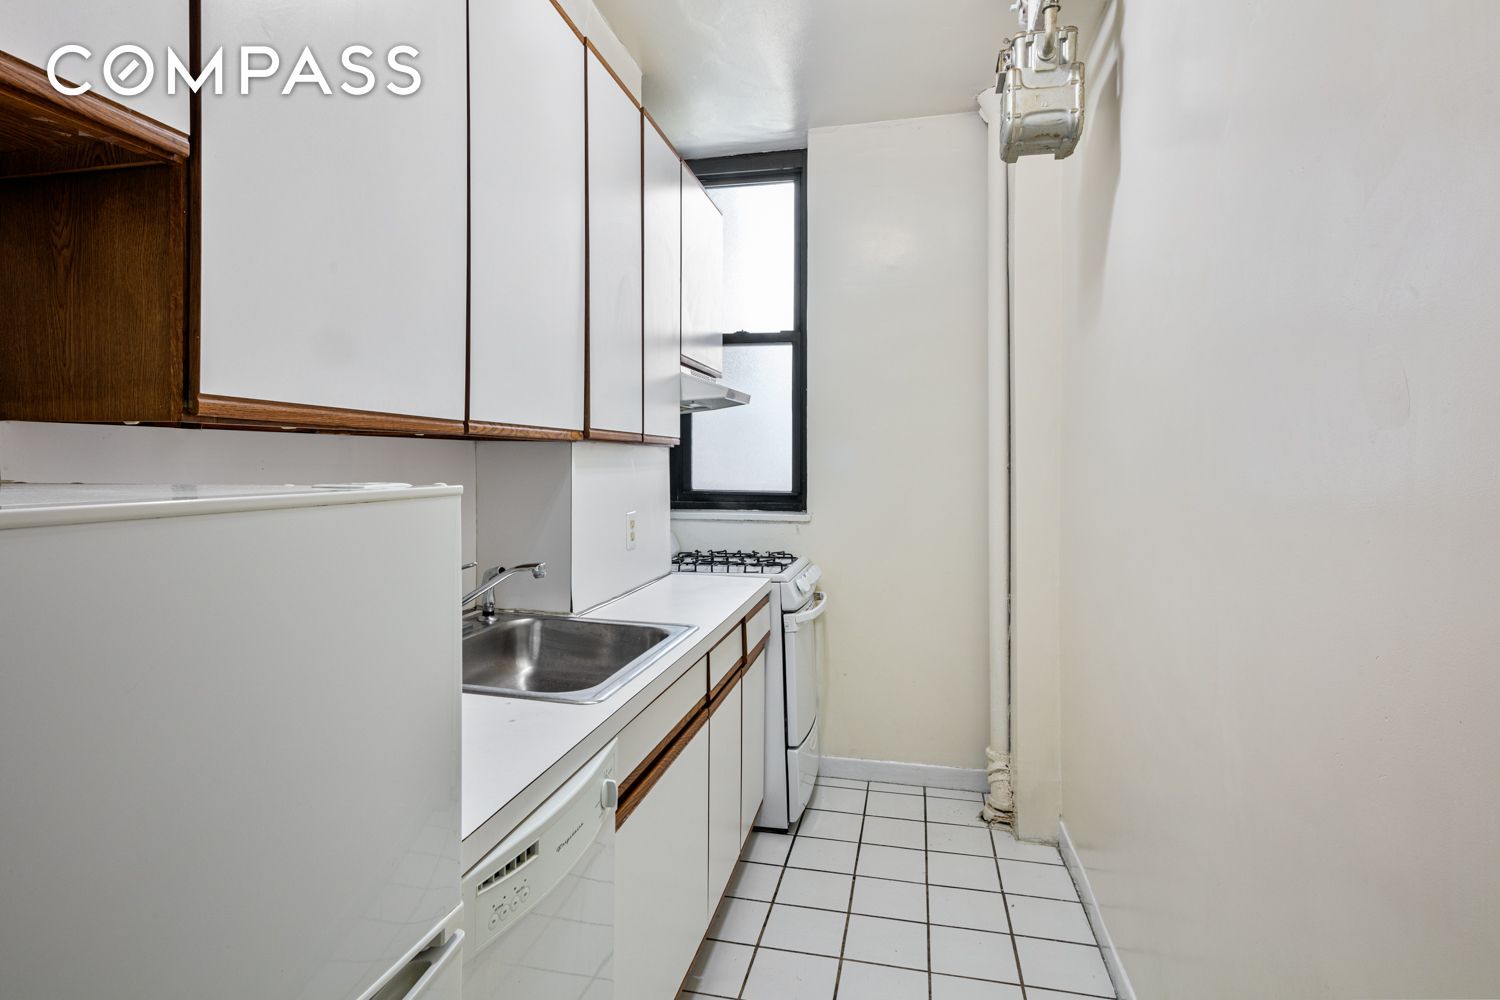 510 West 110th Street, New York City NY 10025 A.N Shell Realty